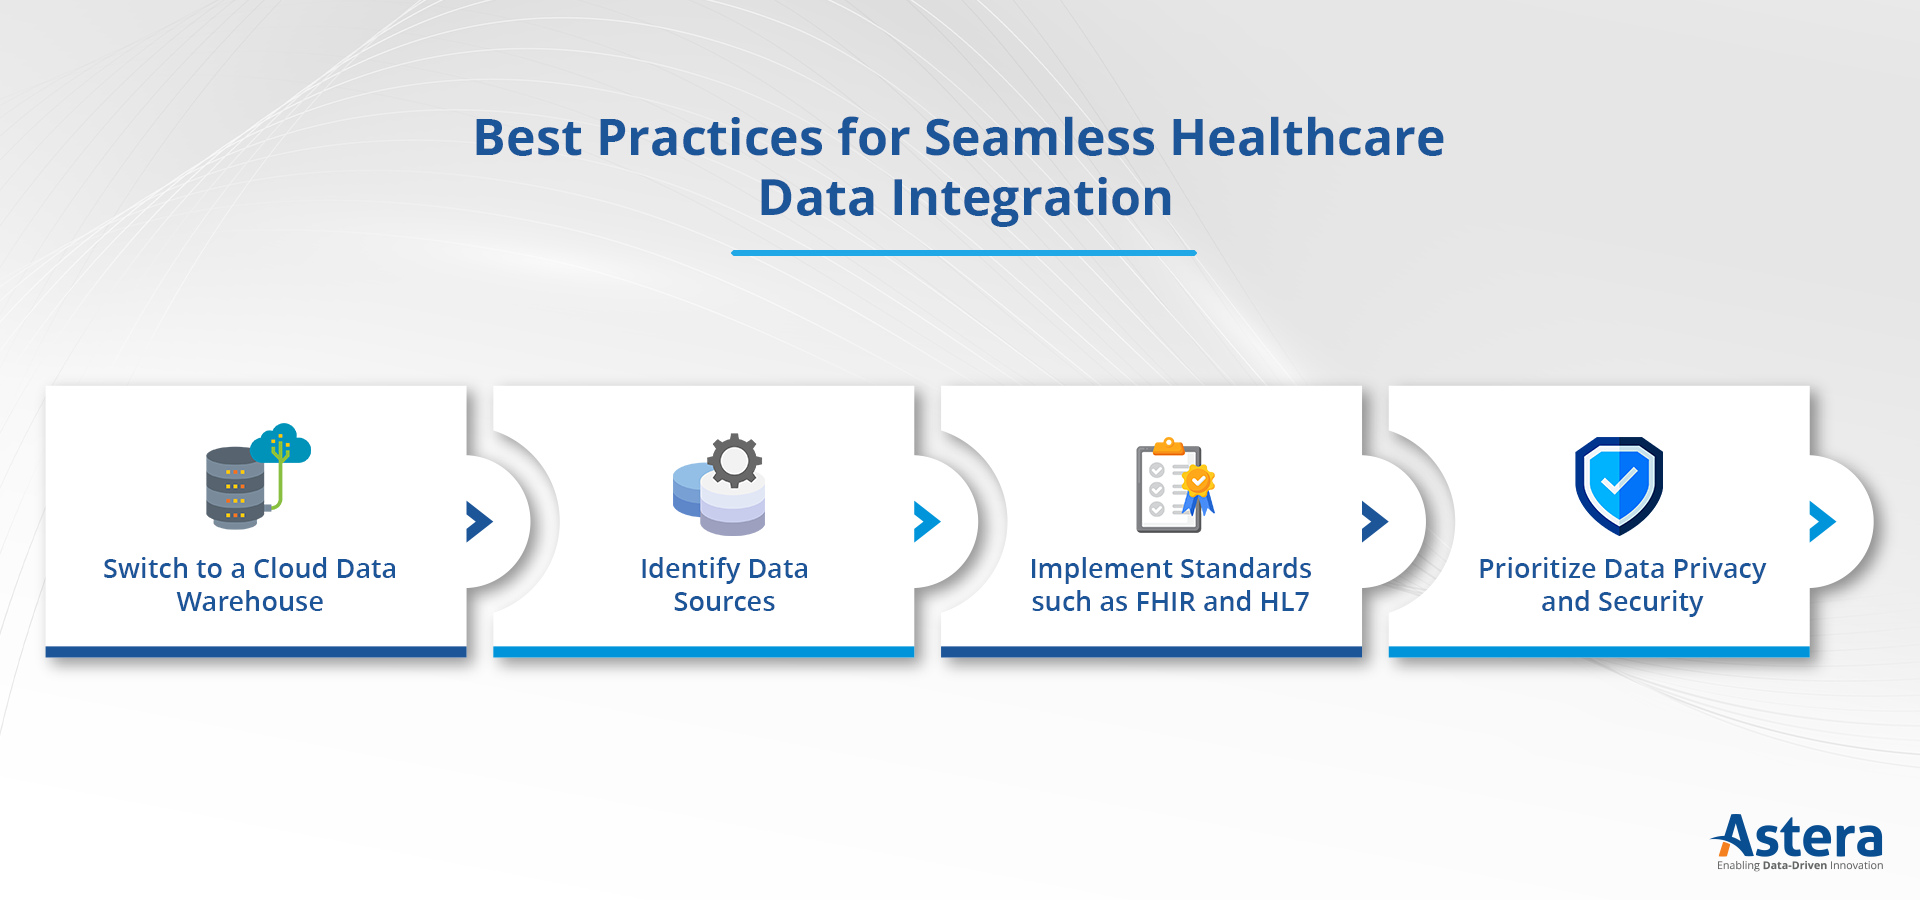 Best practices for seamless healthcare data integration